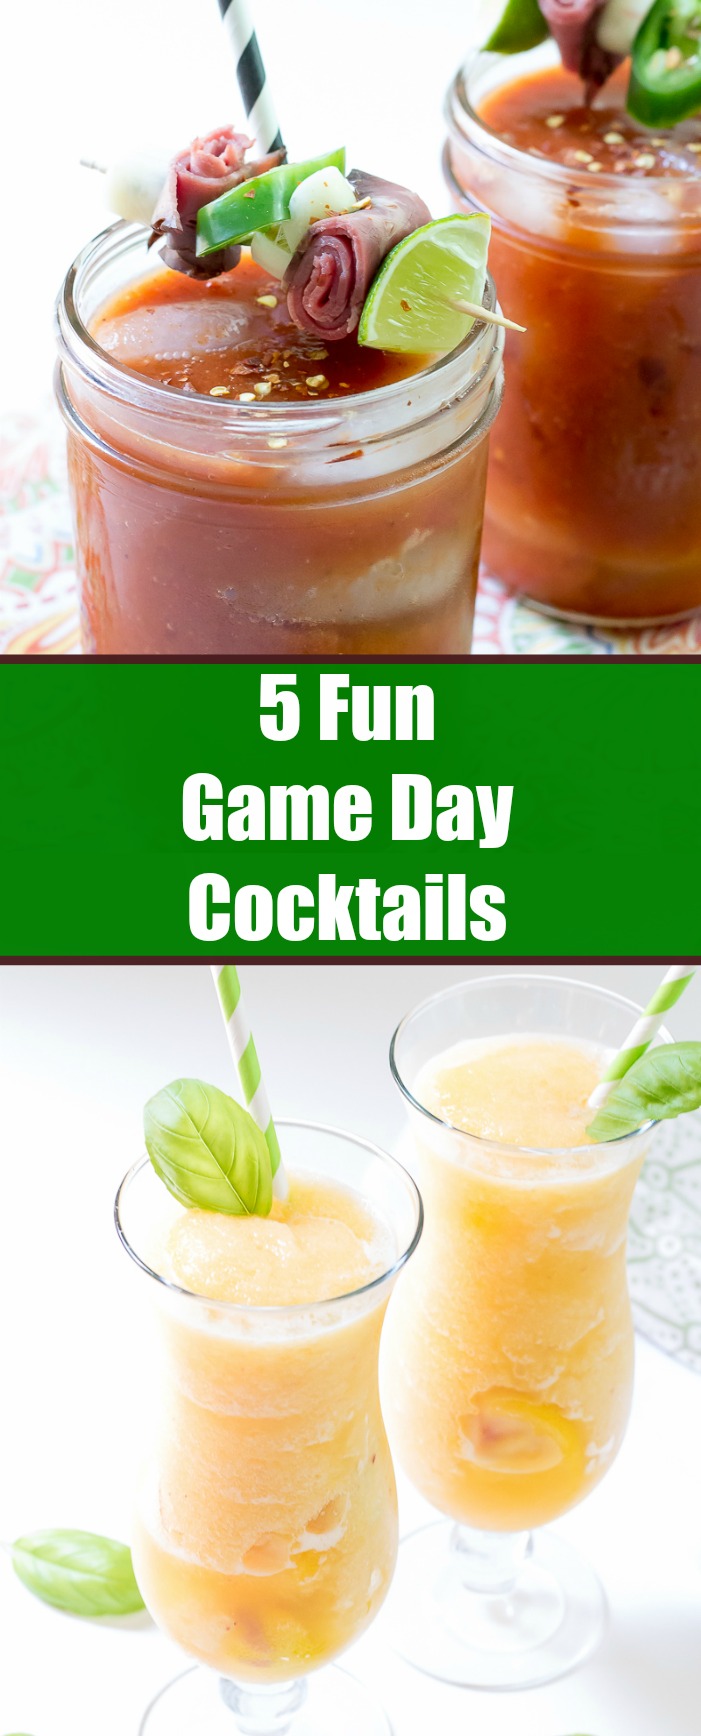 5 Fun Game Day Cocktail recipes